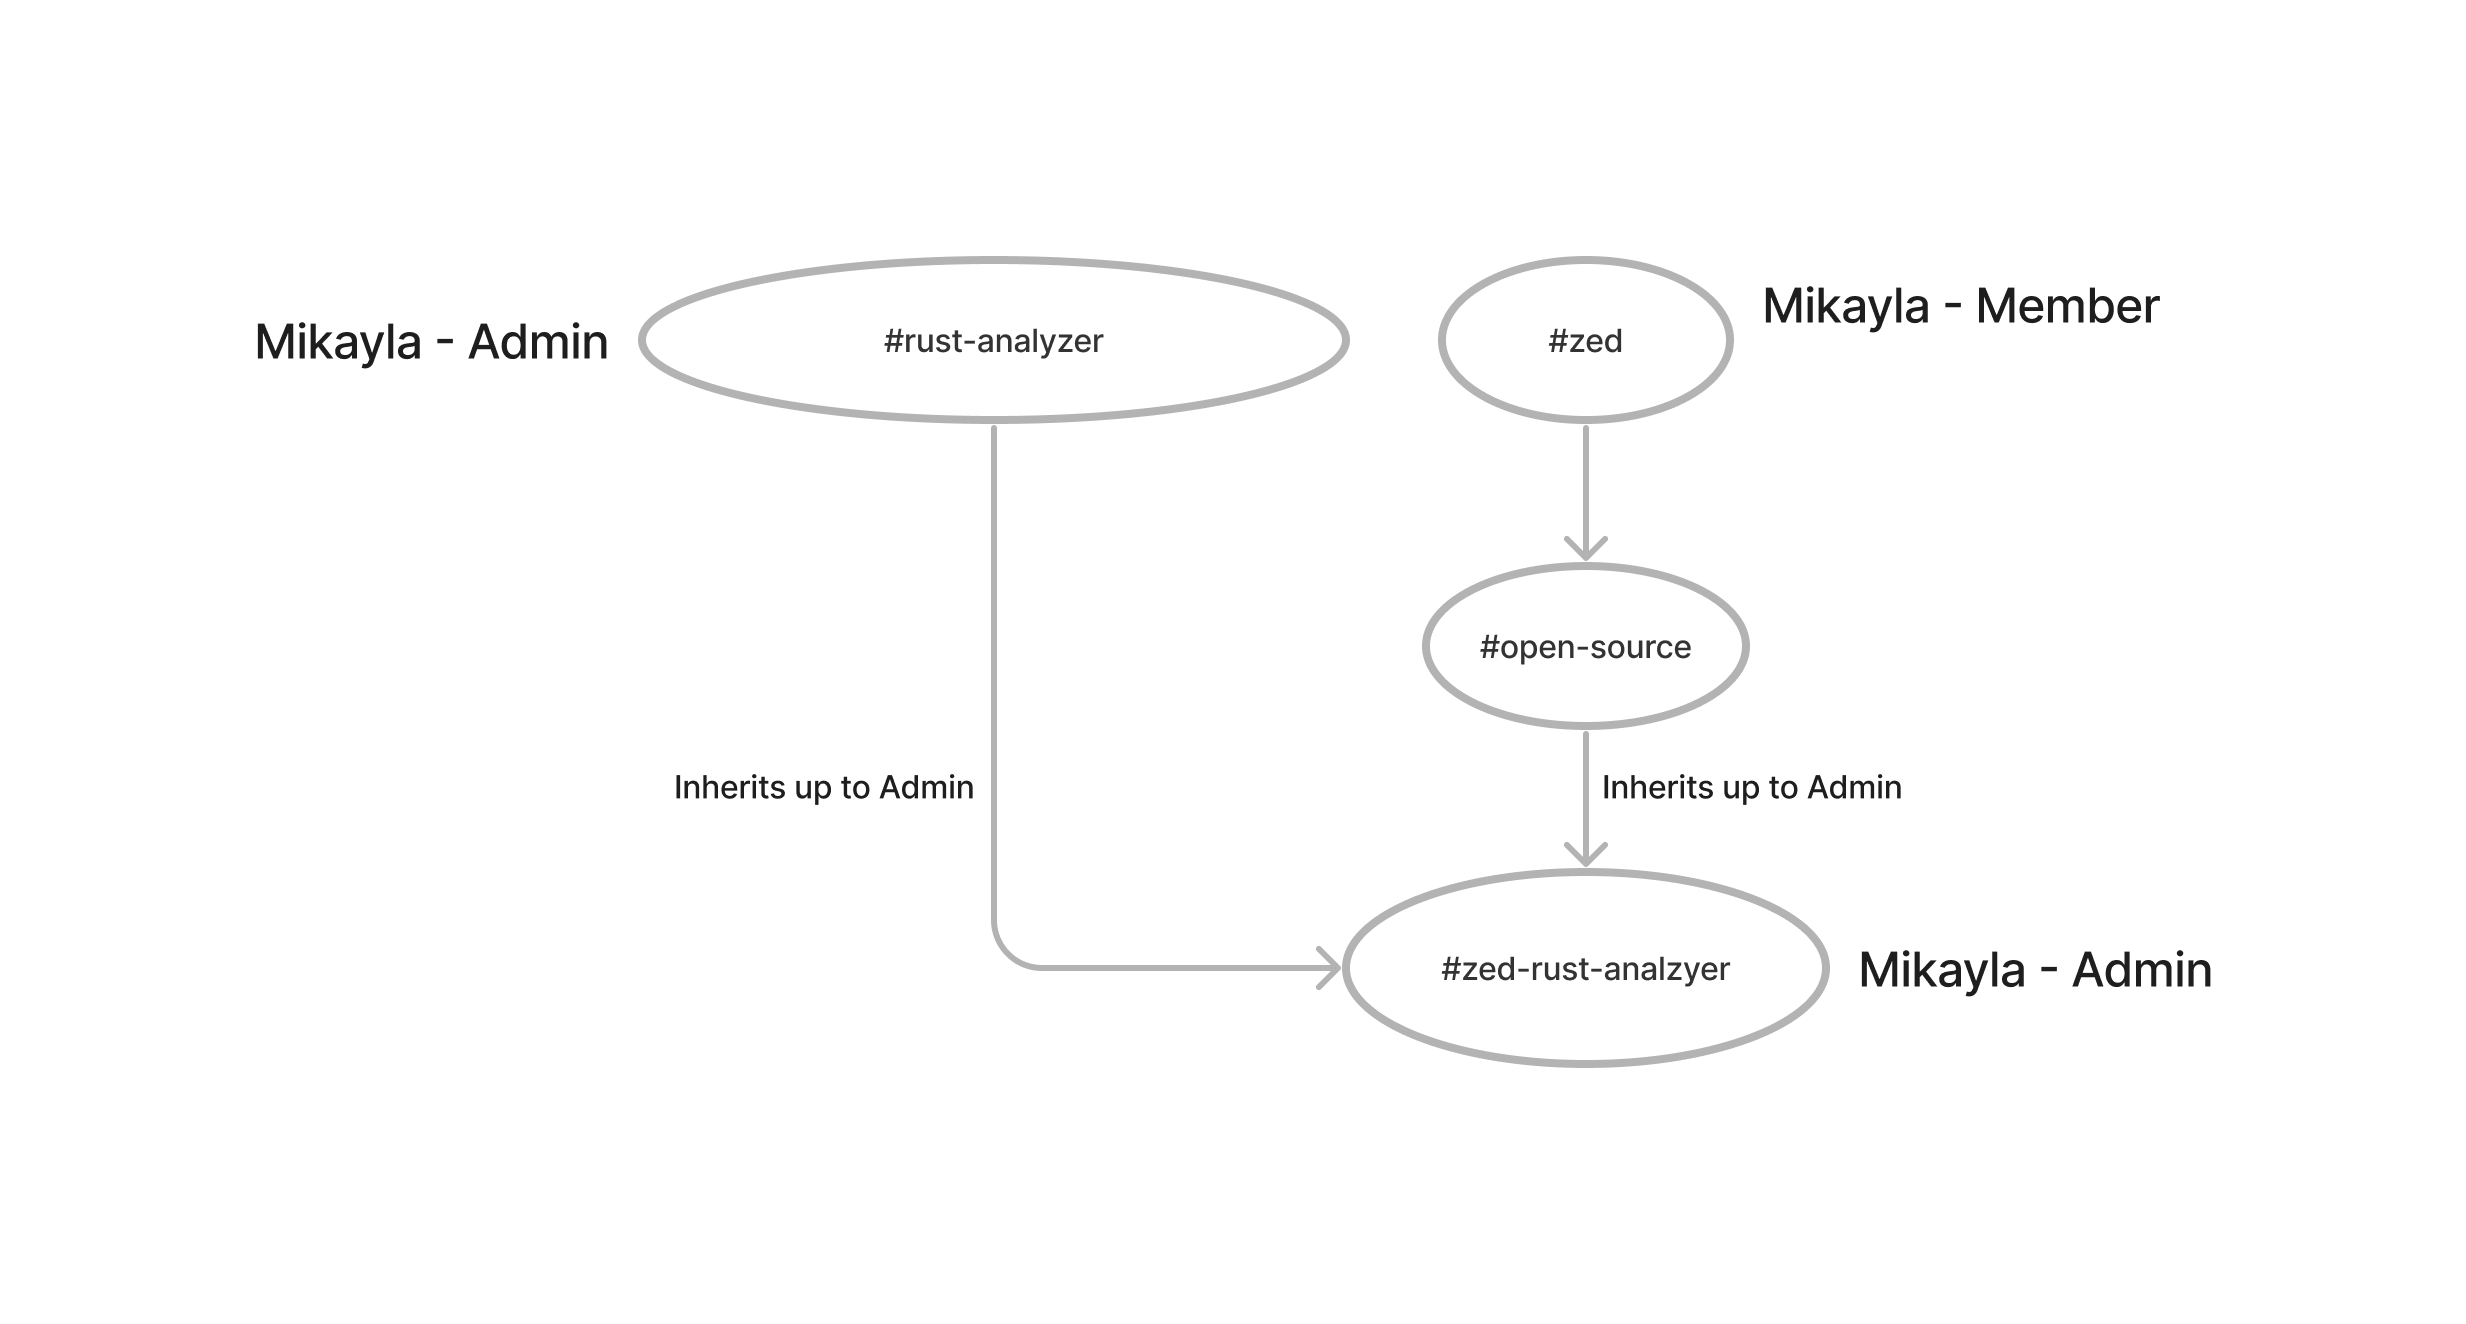 A diagram showing two root channels, #zed and #rust-analyzer, and Mikayla's membership in each channel: In #zed Mikayla is a member. In #rust-analyzer, Mikayla is an Admin. Below #zed is another channel, #open-source, and below that channel another #zed-rust-analyzer which is tagged with Inherits up to Admin. There is also an edge between #rust-analyzer and #zed-rust-analyzer also with an Inherits up to Admin tag. Mikayla's membership role in #zed-rust-analyzer is shown to be Admin. 